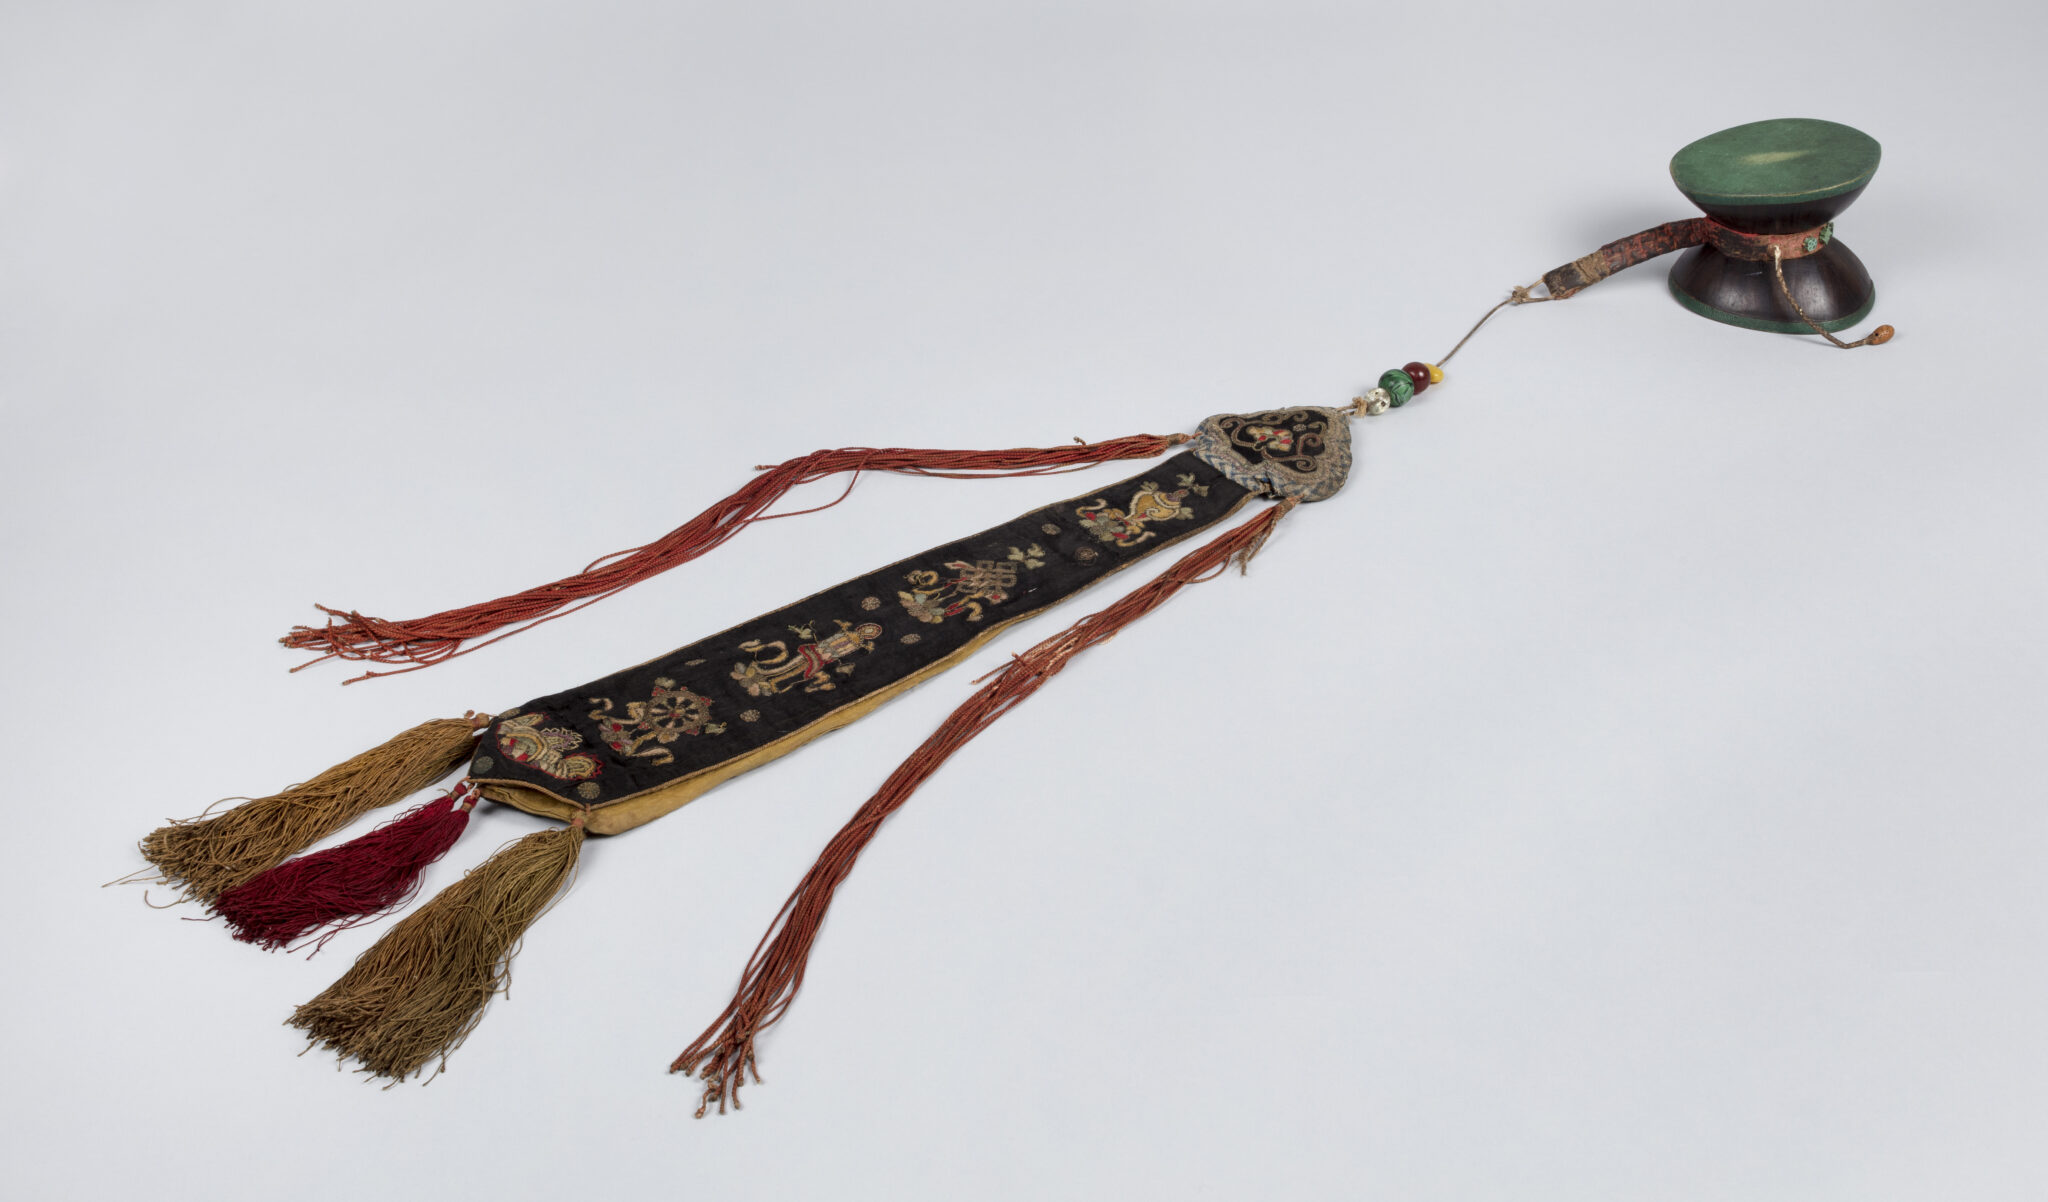 Small, green, double-headed drum attached with cord to long tassel embroidered with religious motifs